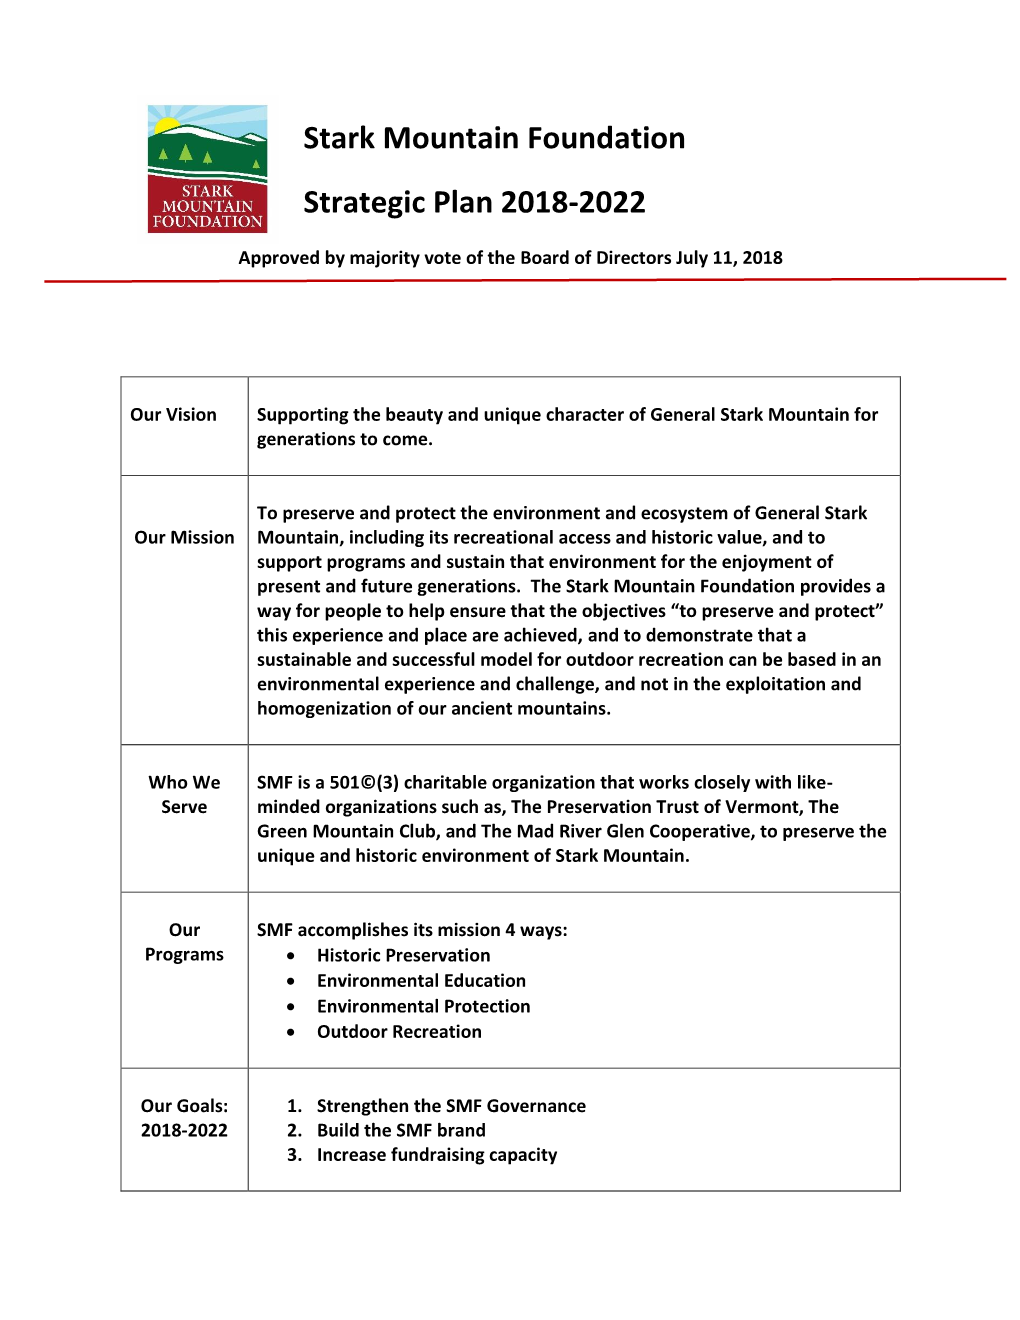 Stark Mountain Foundation Strategic Plan 2018-2022 Approved by Majority Vote of the Board of Directors July 11, 2018